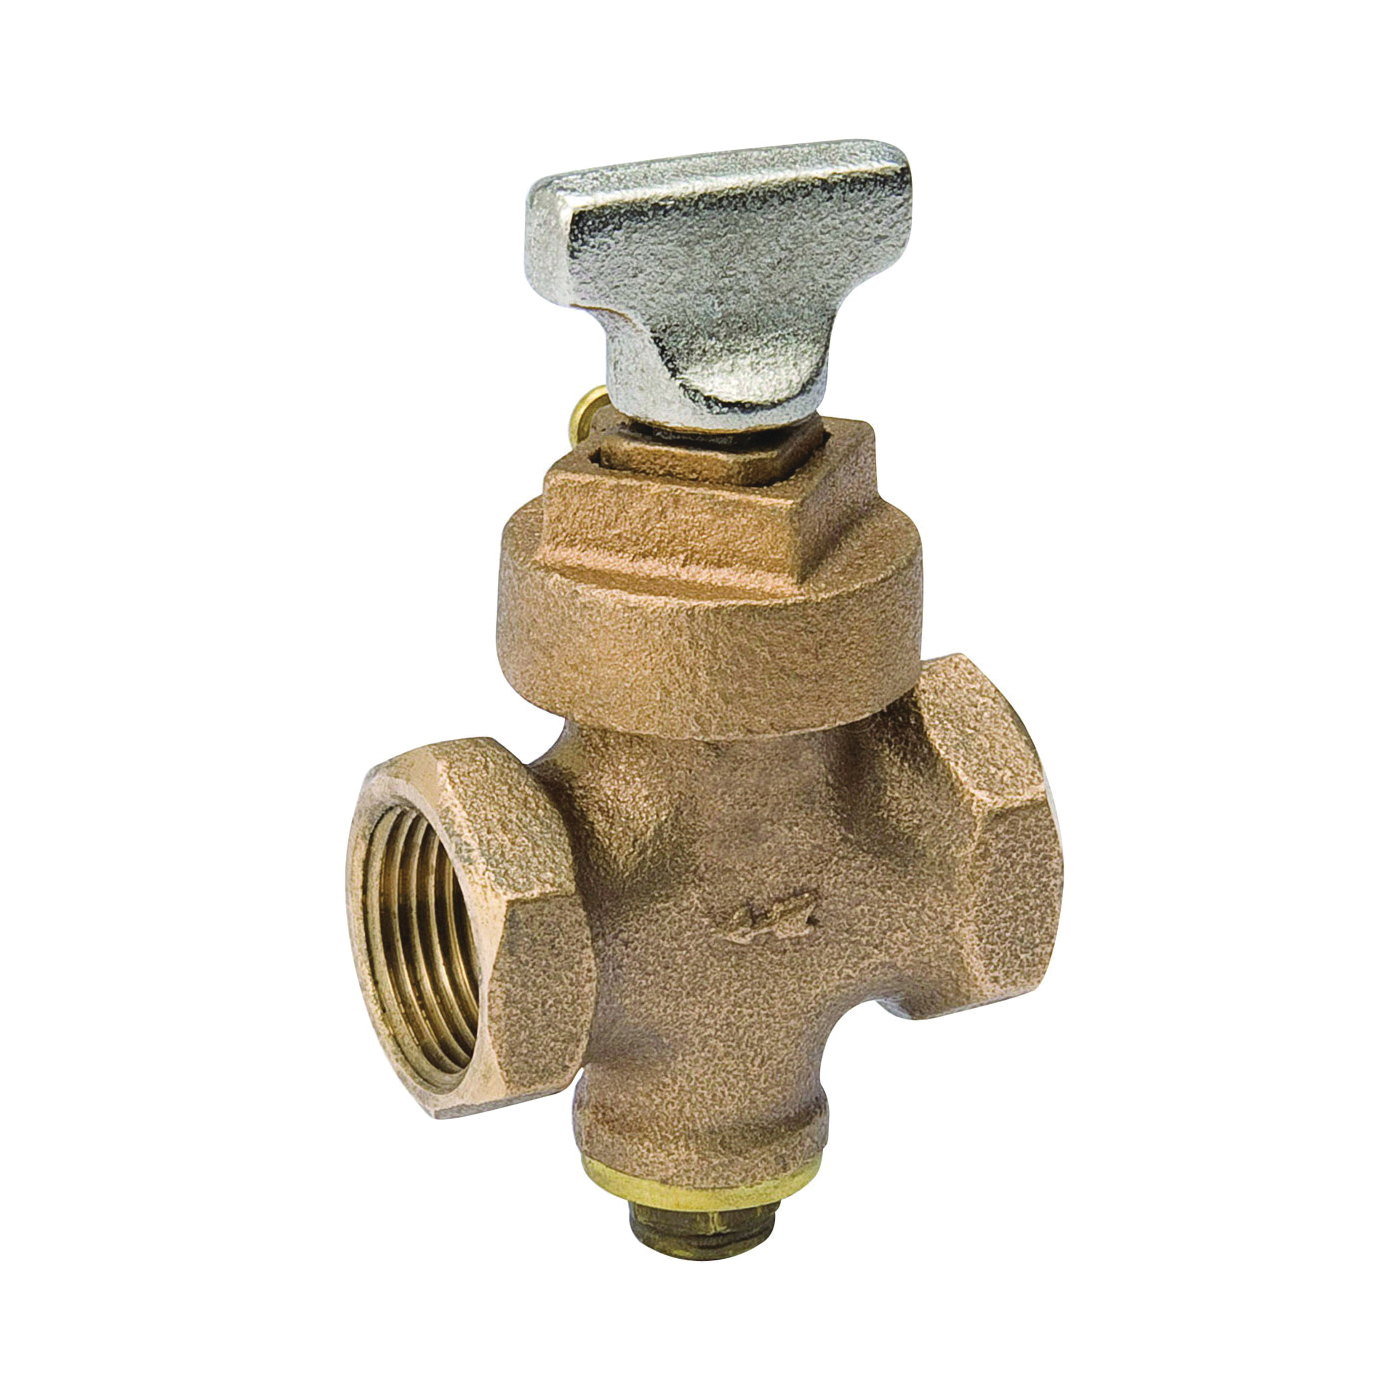 105-904NL Stop and Drain Valve, 3/4 in Connection, FPT x FPT, Brass Body